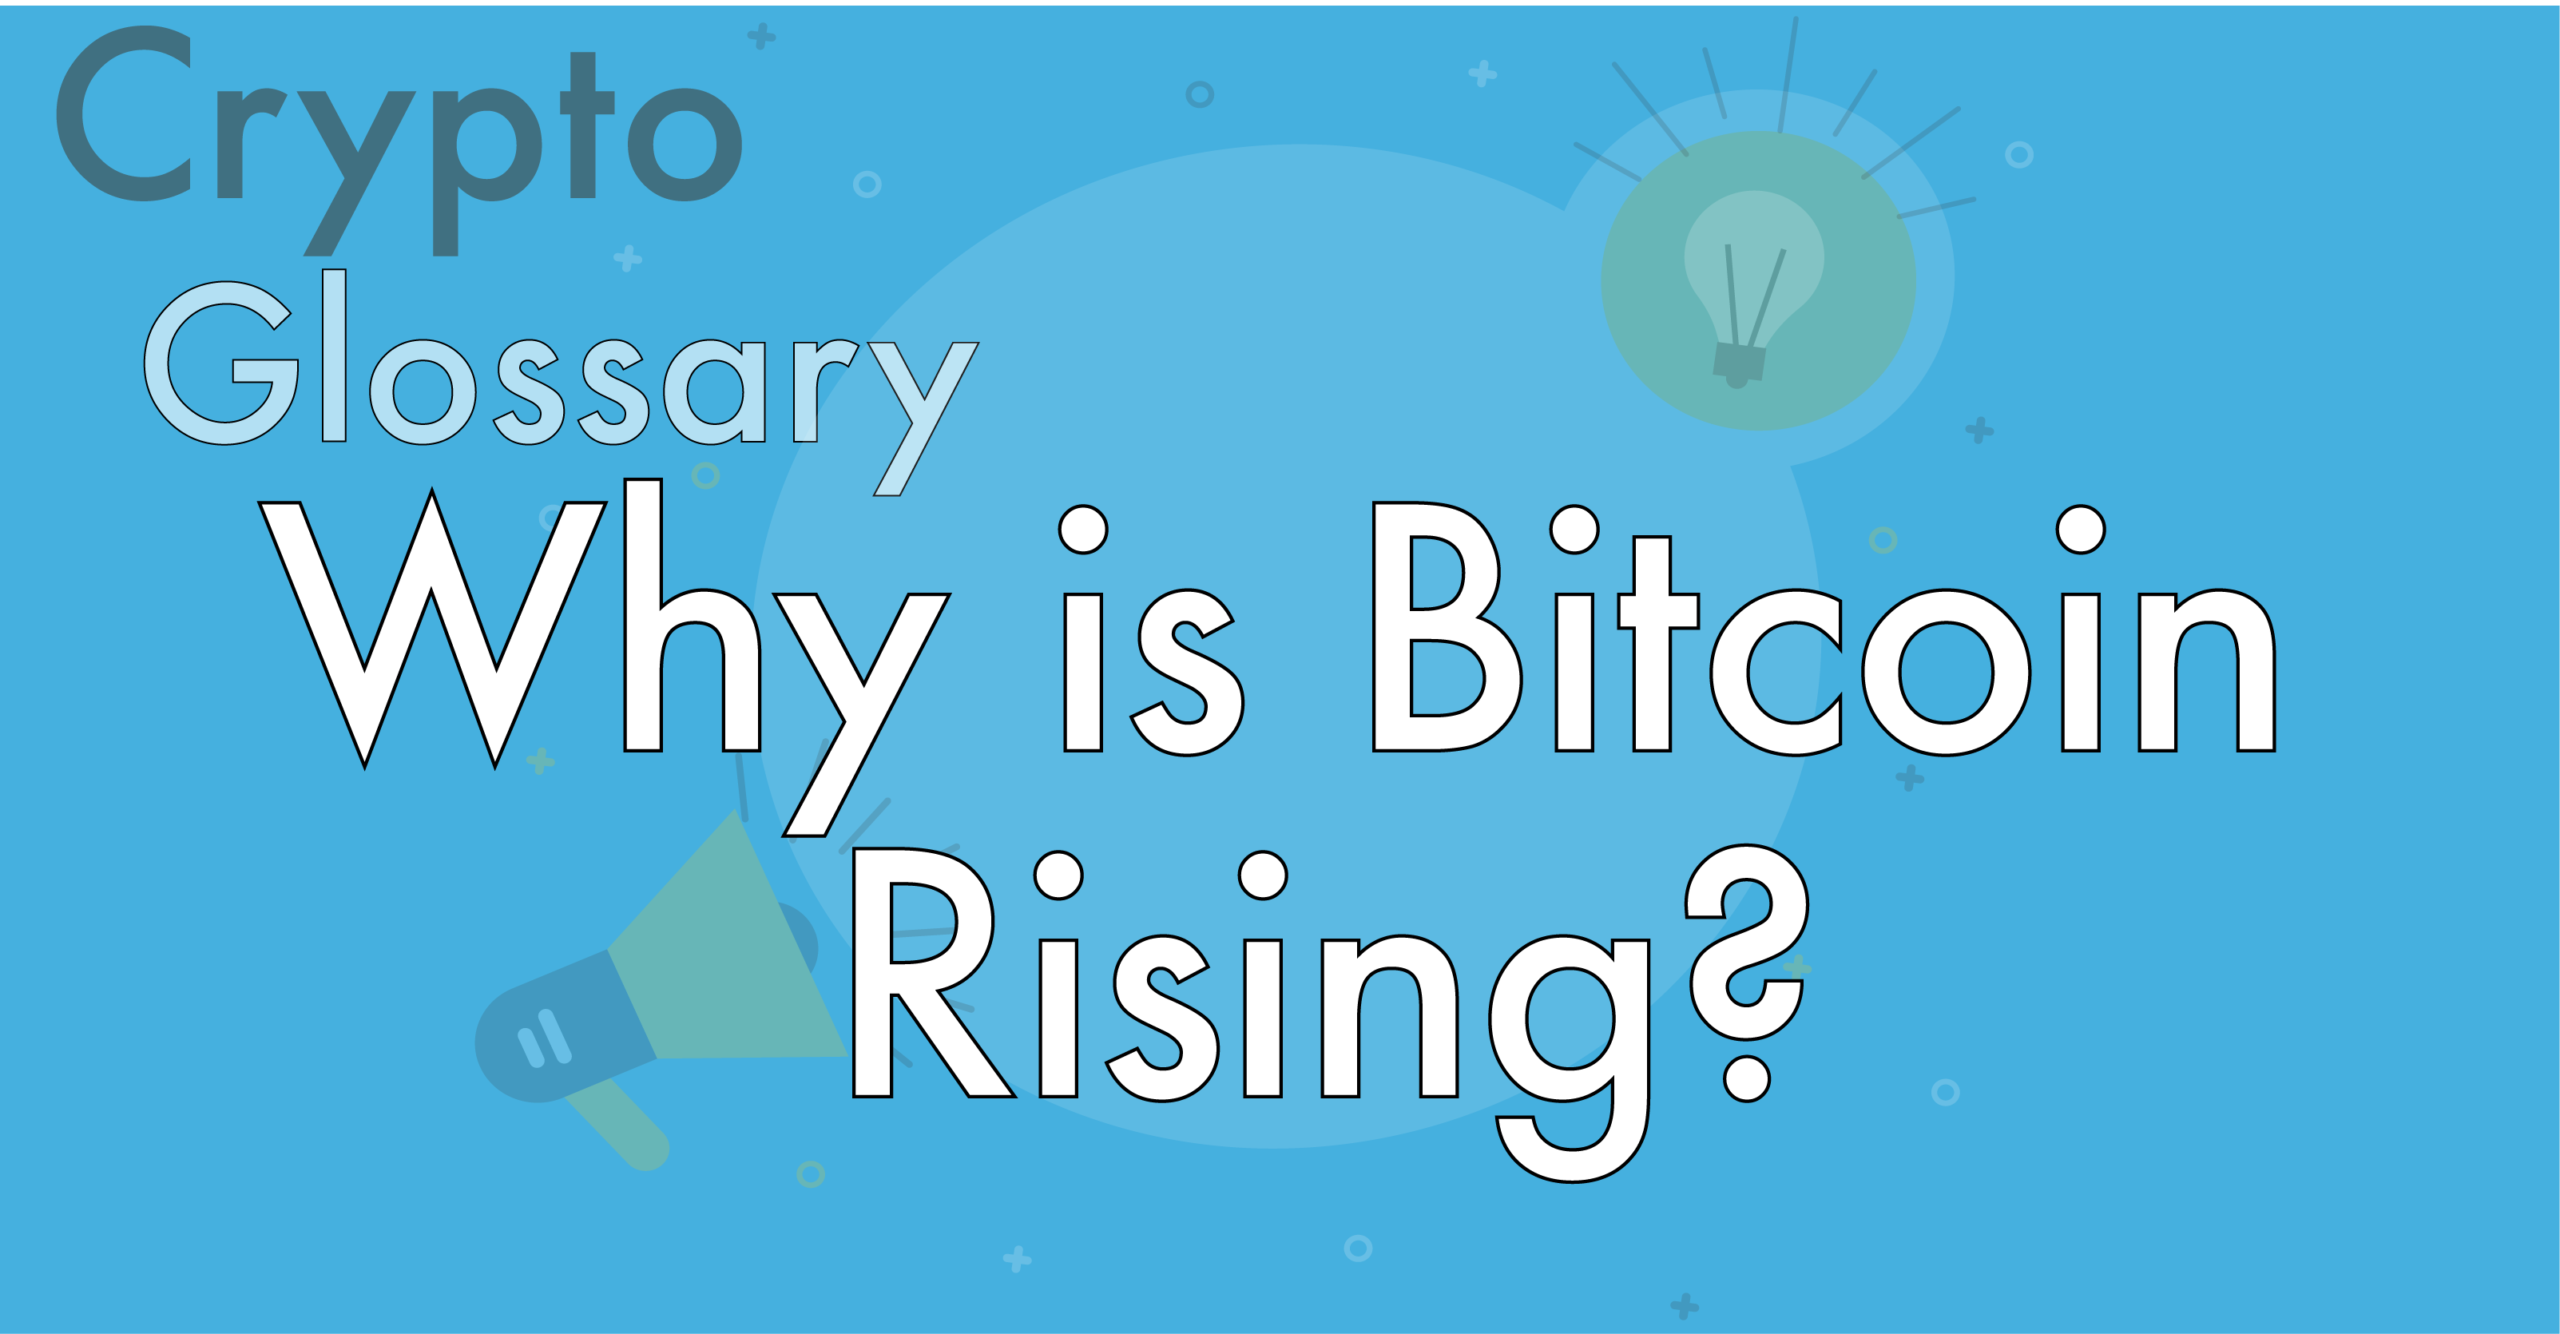 Why Bitcoin is Rising? An In-Depth Look at Bitcoin’s Growth